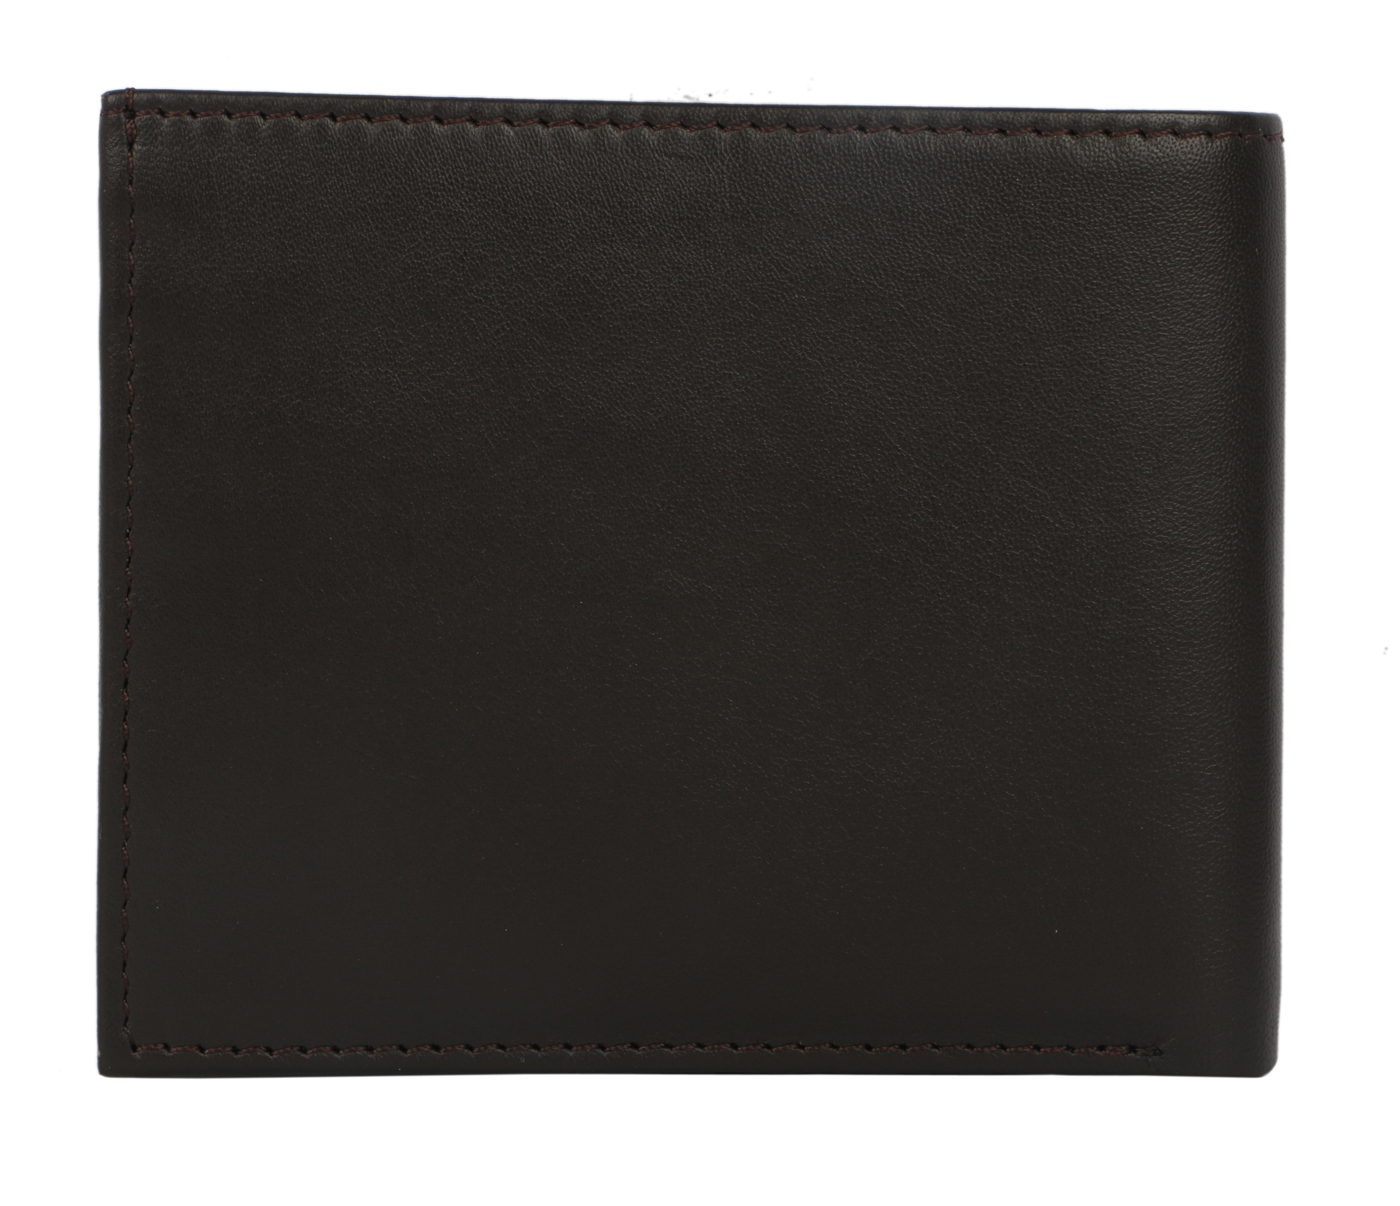 W41-Daniel-Men's bifold wallet with card pockets in Genuine Leather - Brown